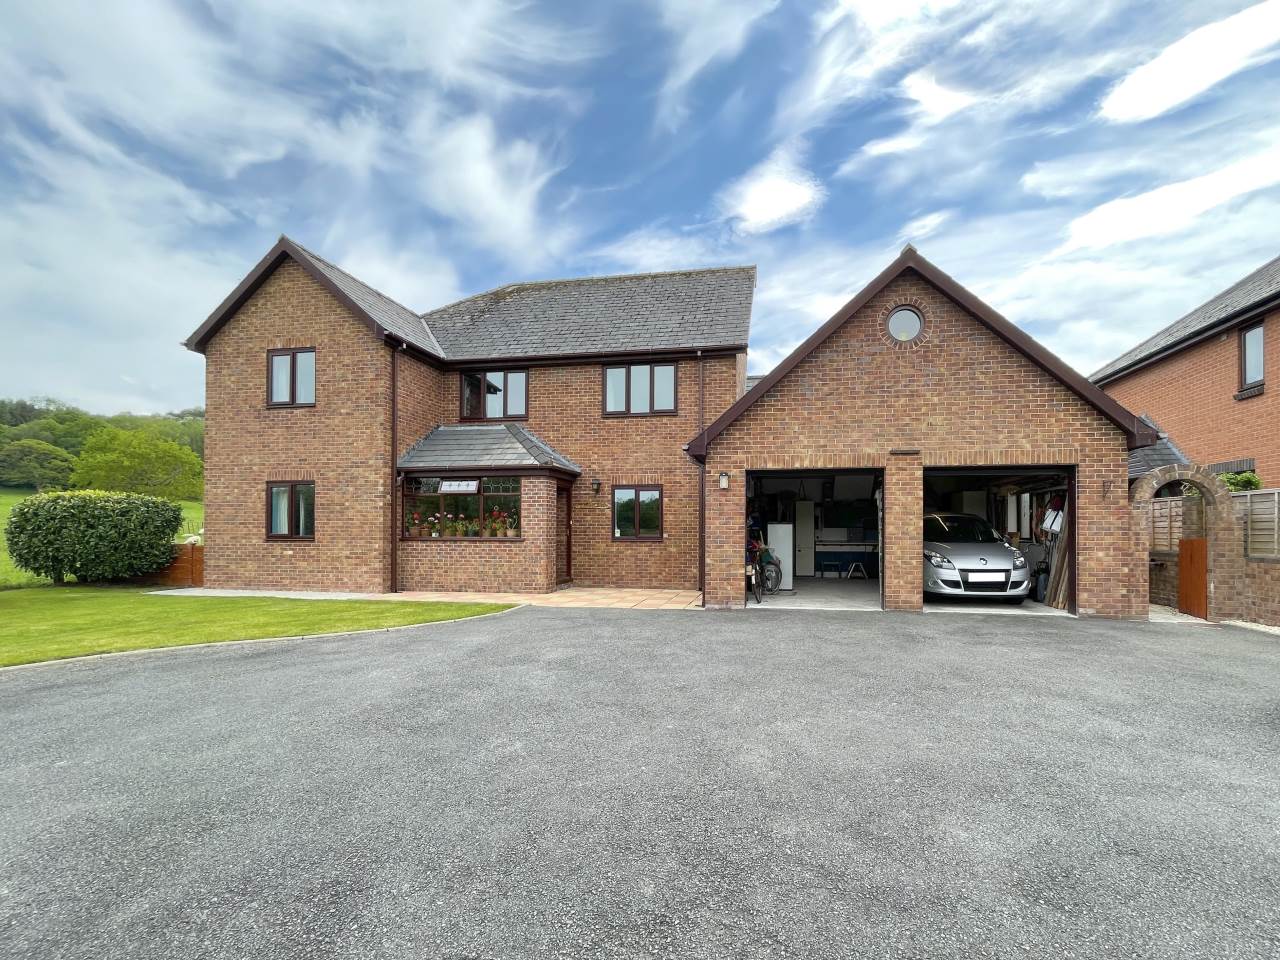 4 bed house for sale in Swn-y-Plant, 1 Troedybryn  - Property Image 1